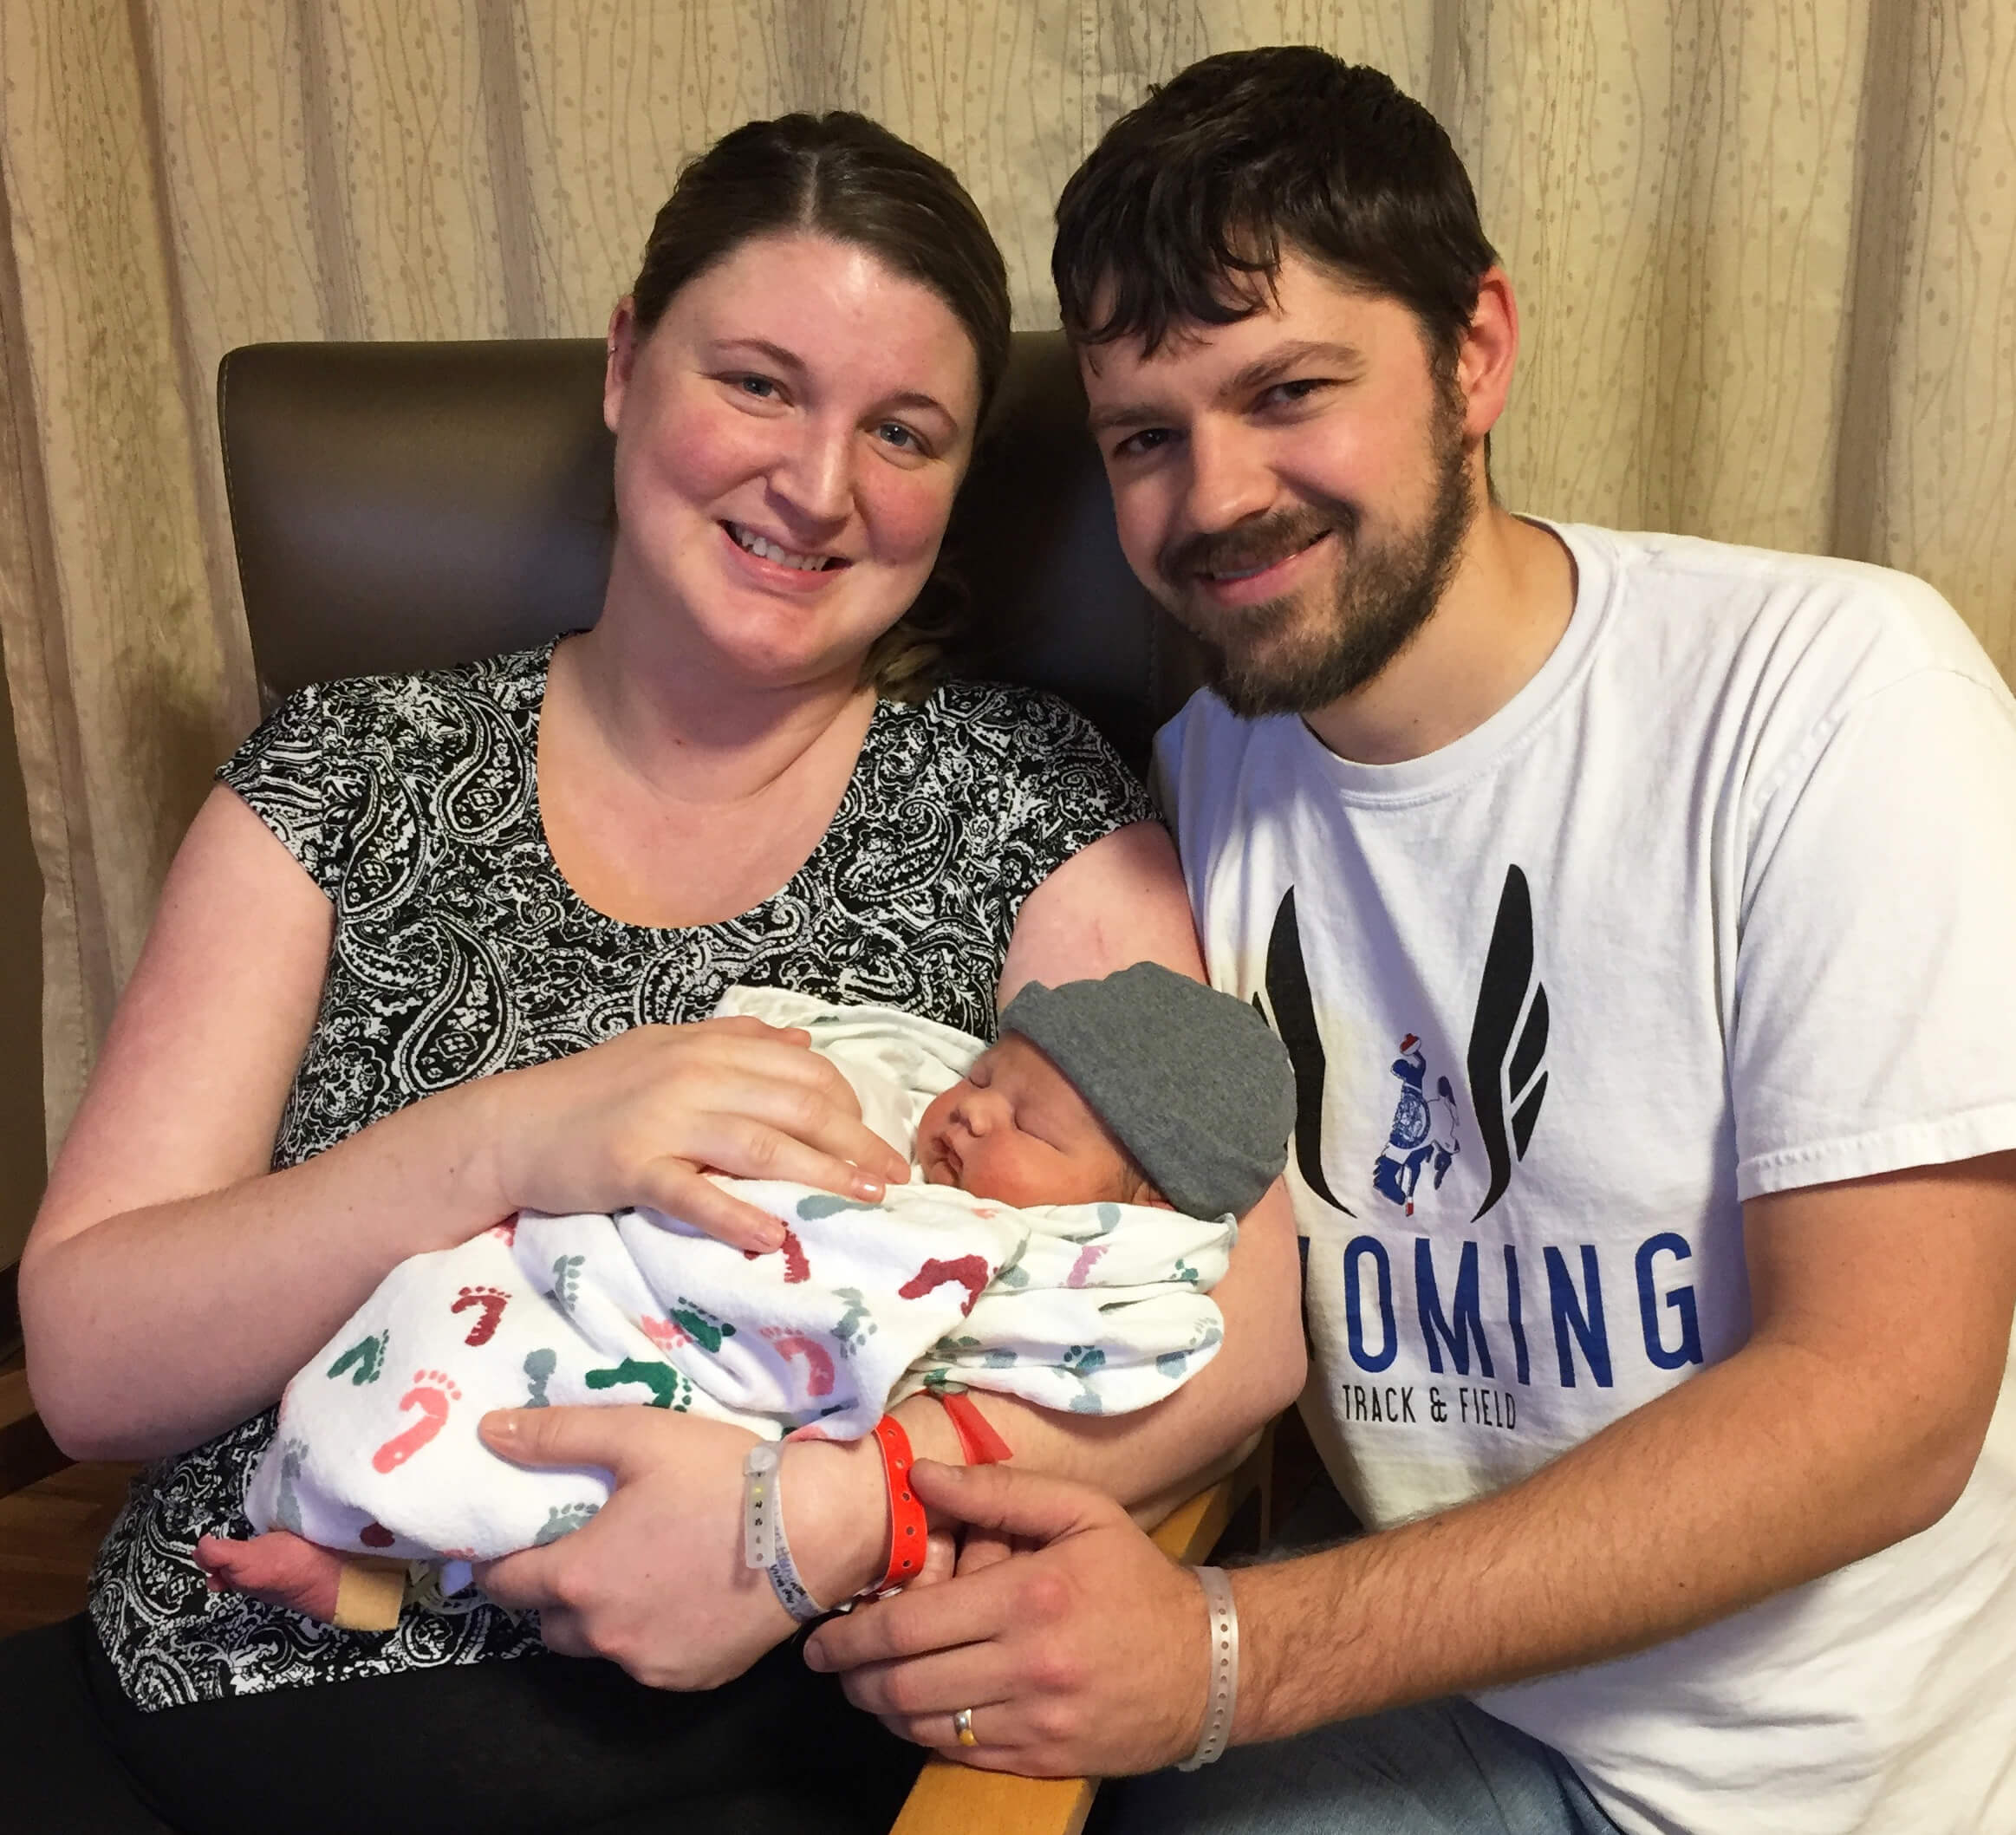 Arkyn William Leavitt is the first child of Craig and Hilary Hollihan Leavitt of Green River.